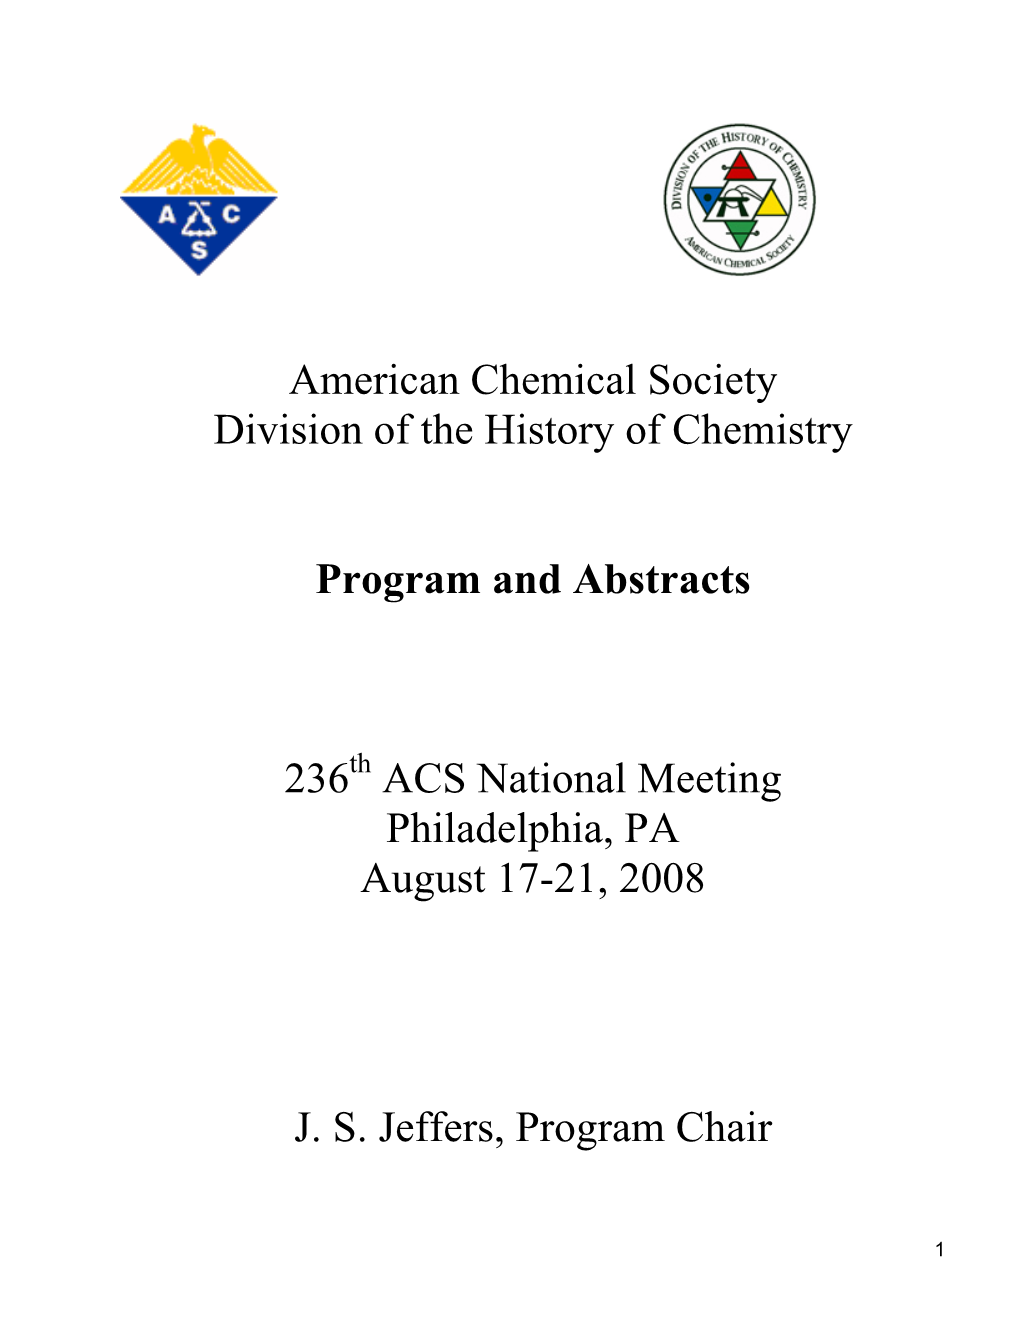 American Chemical Society Division of the History of Chemistry Program